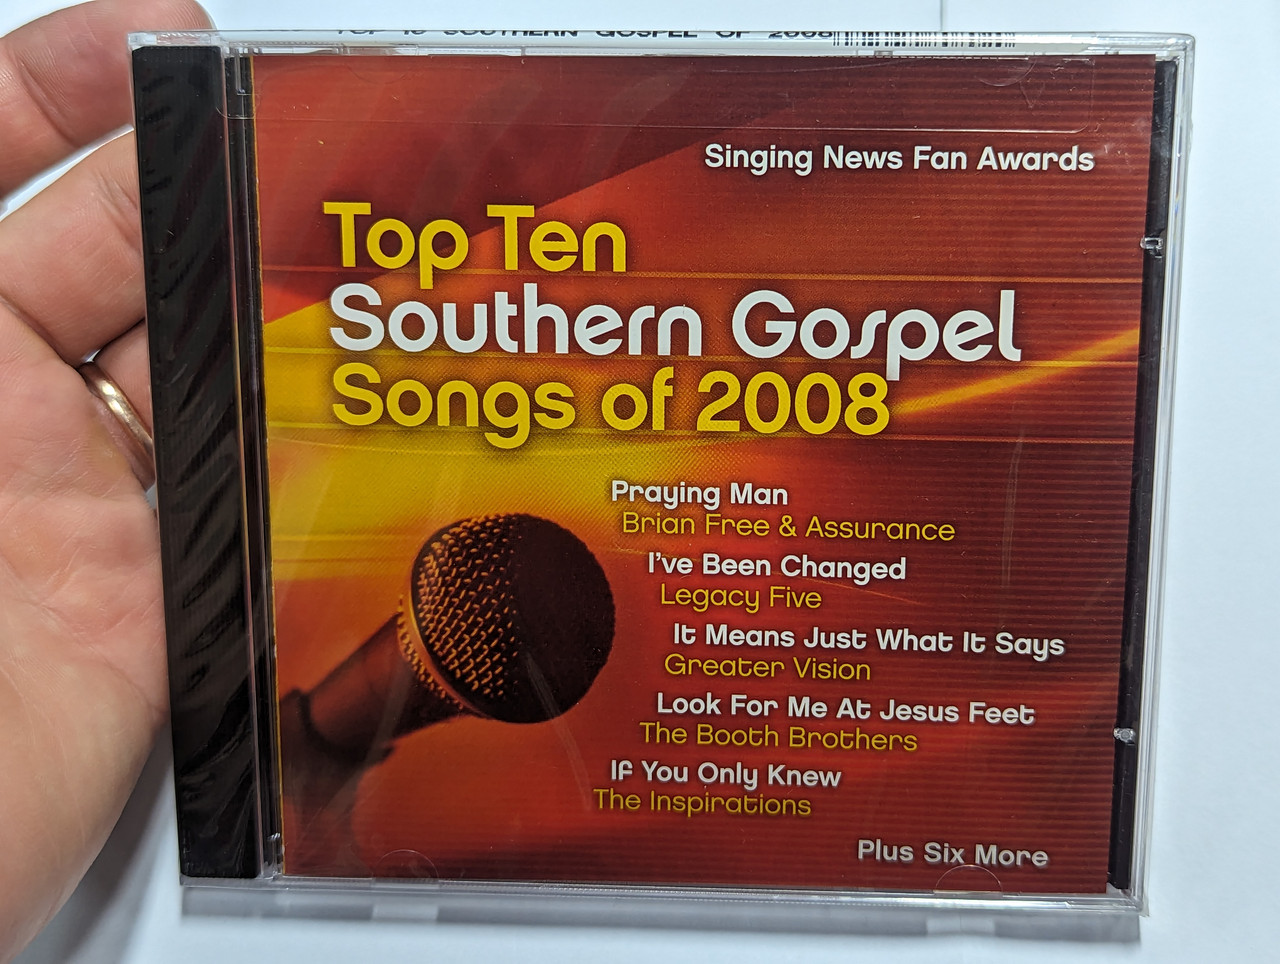 https://cdn10.bigcommerce.com/s-62bdpkt7pb/products/0/images/304470/Top_Ten_Southern_Gospel_Songs_Of_2008_-_Praying_Man_Brian_Free_Assurance_Ive_Been_Changed_Legacy_Five_It_Means_Just_What_It_Says_Greater_Vision_Look_For_Me_At_Jesus_Feet_The_Booth_Broth_1__12104.1697696679.1280.1280.jpg?c=2&_gl=1*fpnz5f*_ga*MjA2NTIxMjE2MC4xNTkwNTEyNTMy*_ga_WS2VZYPC6G*MTY5NzY5MDU3OC4xMTA5LjEuMTY5NzY5NjI4NC42MC4wLjA.